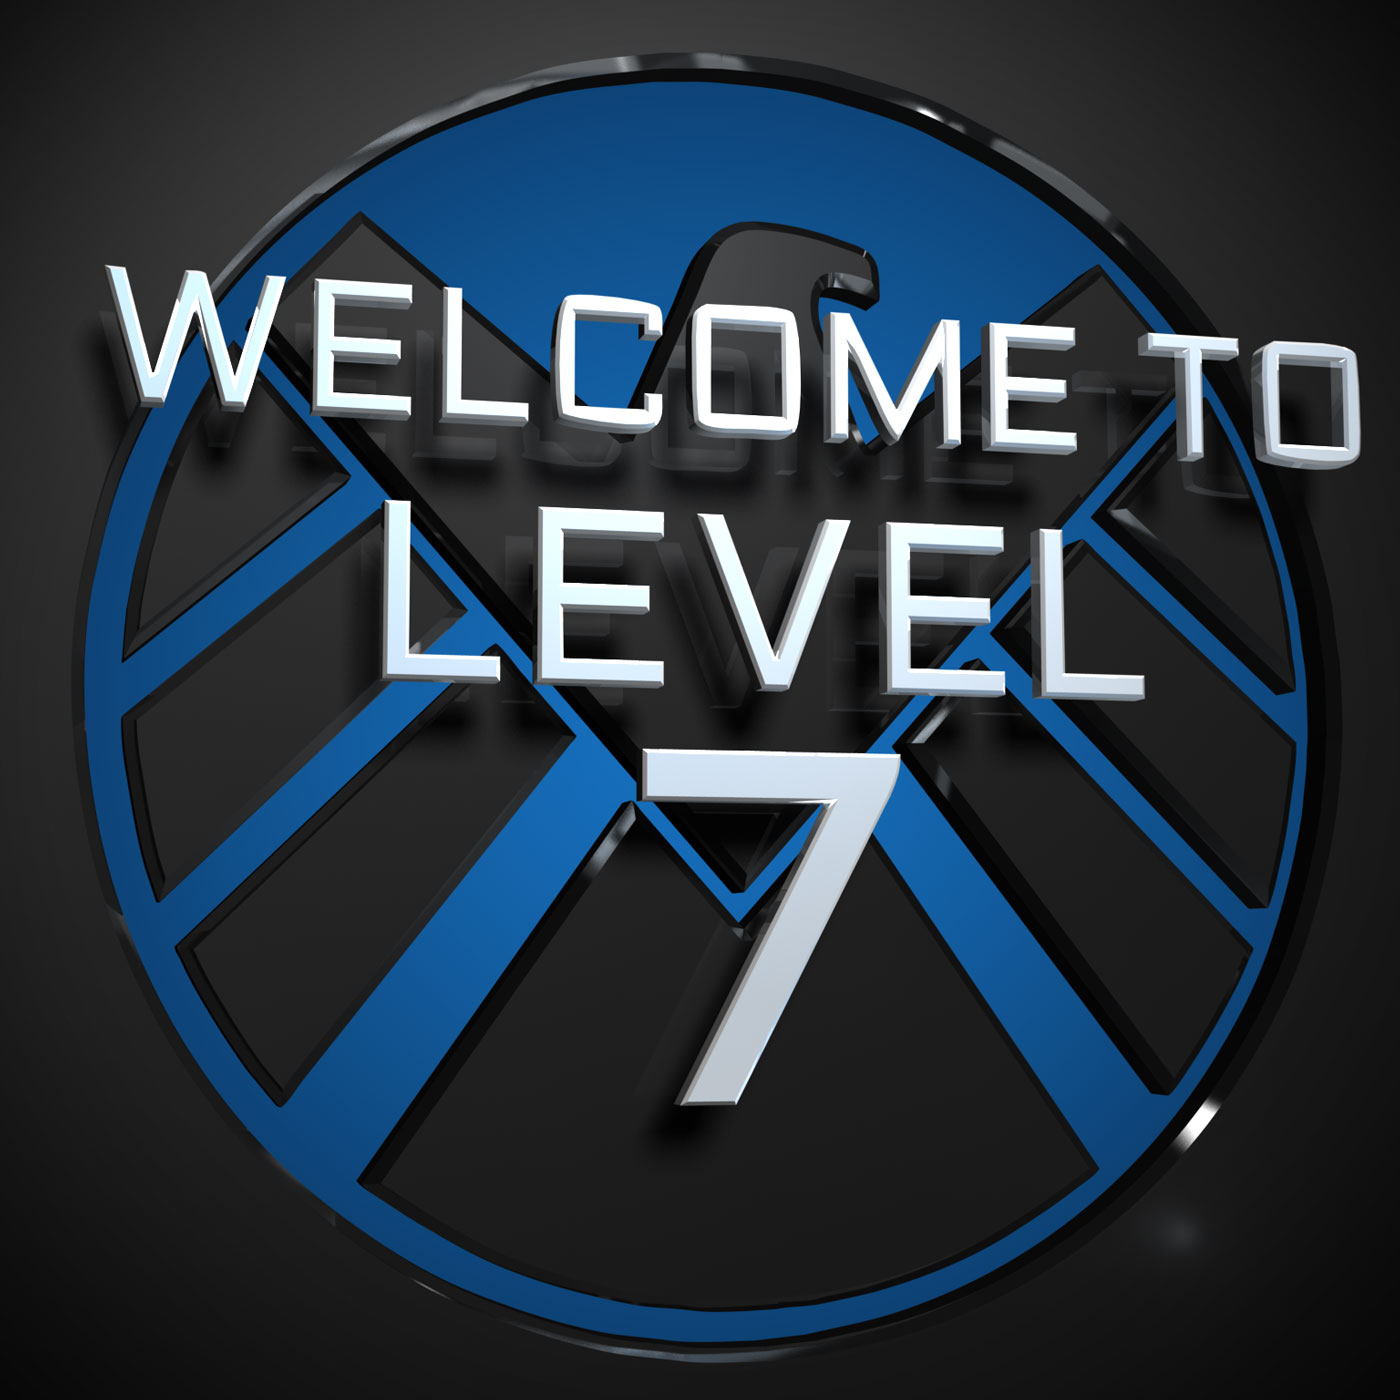 Welcome to Level Seven